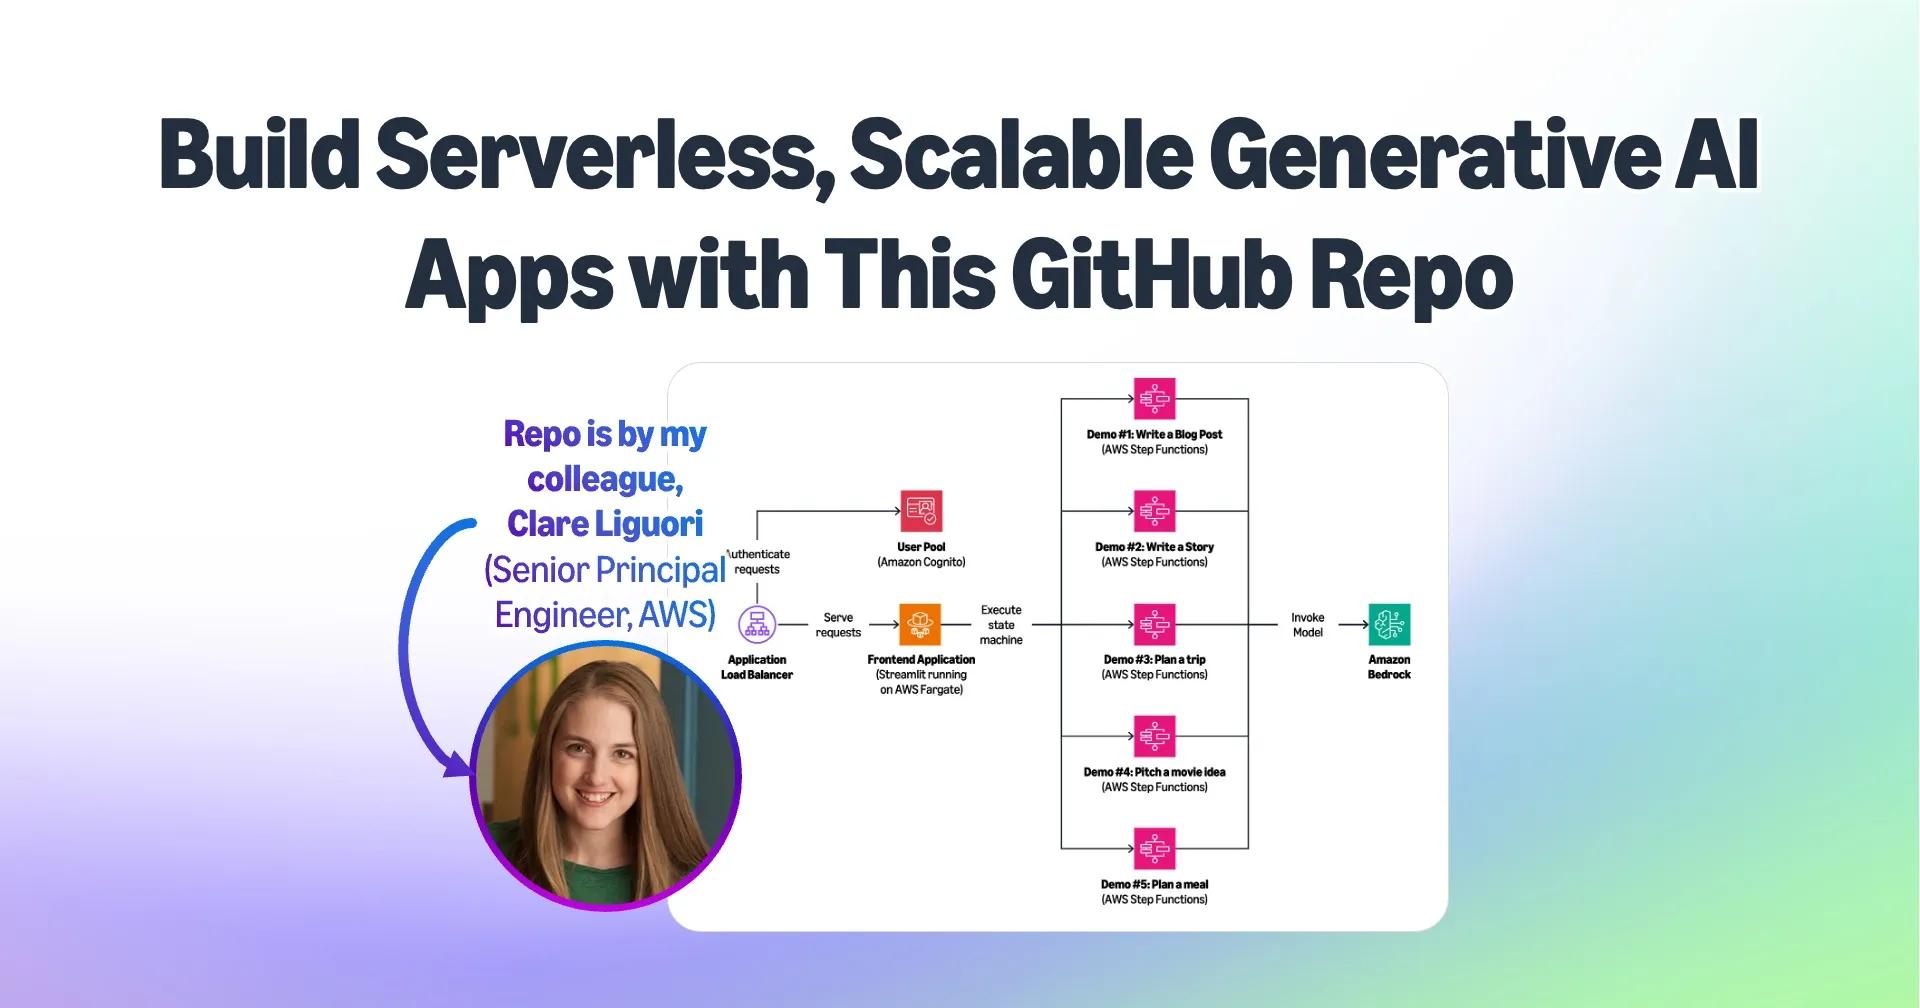 Build Serverless, Scalable Generative AI Apps with This GitHub Repo